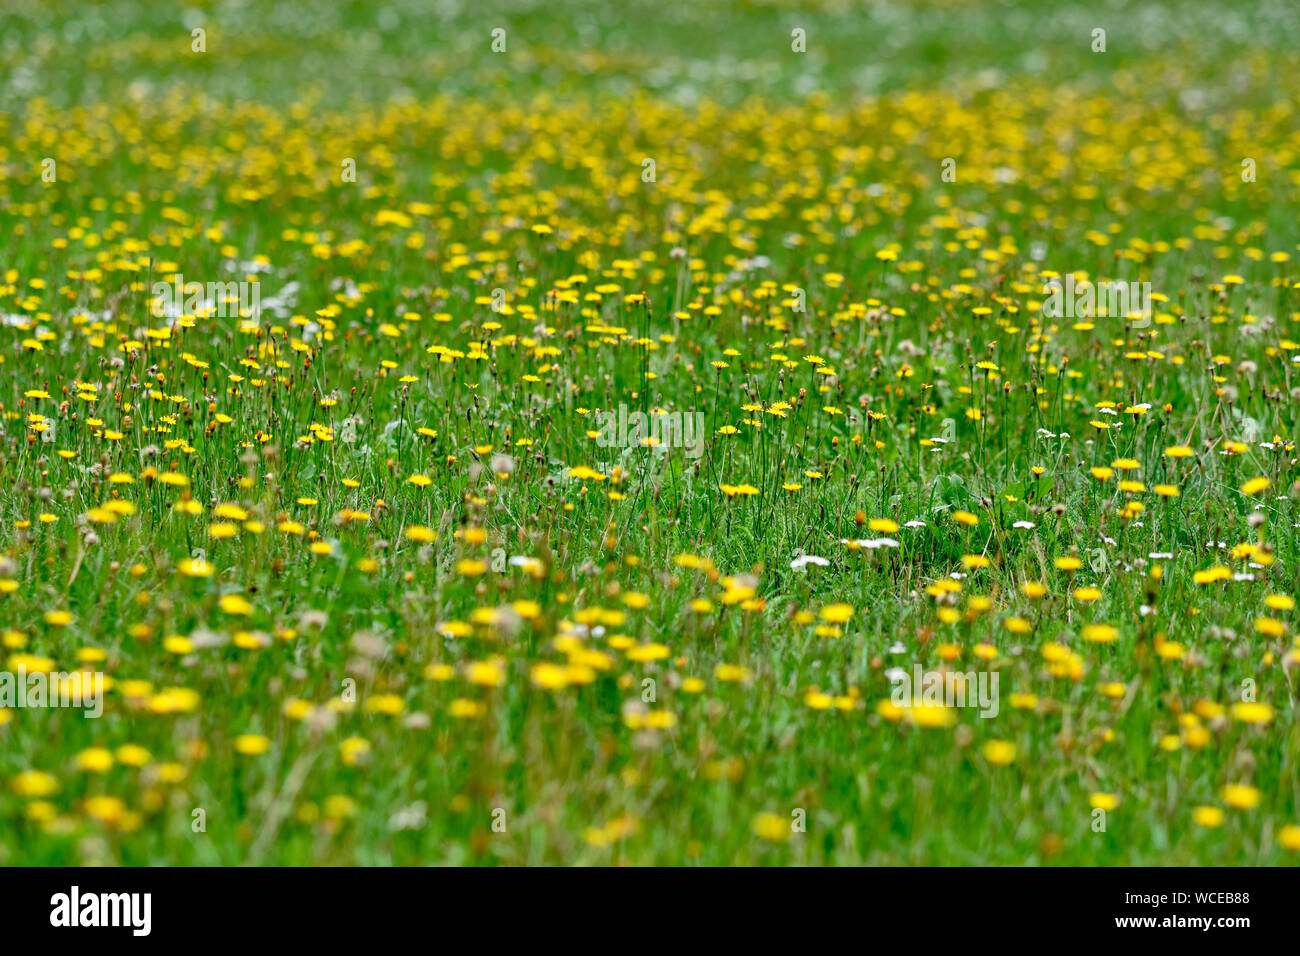 A beautiful natural green meadow full of yellow blooming autumn hawkbit flowers Stock Photo